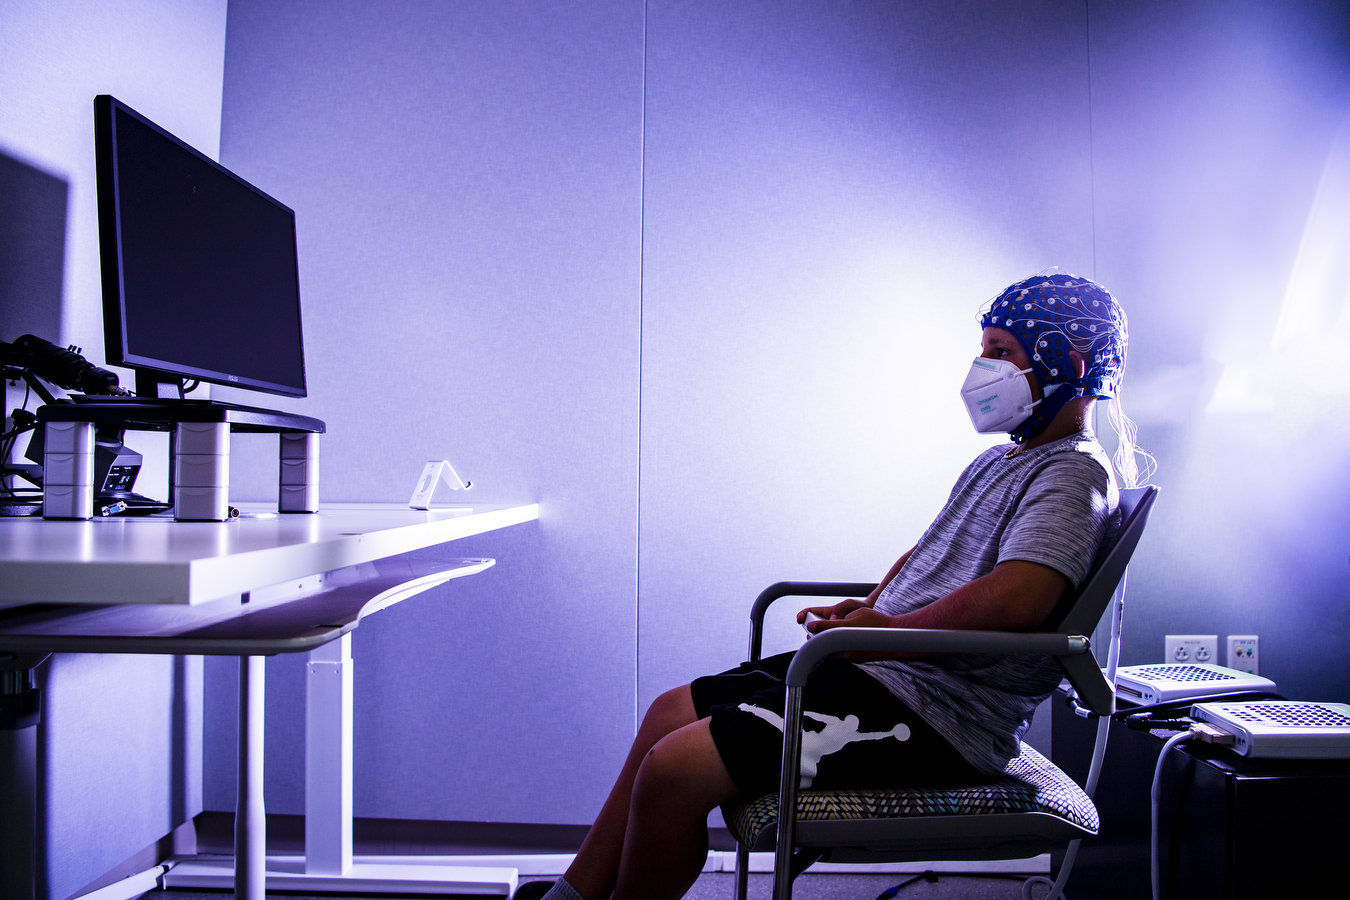 A study participant wearing a cap with sensors looks at a TV screen